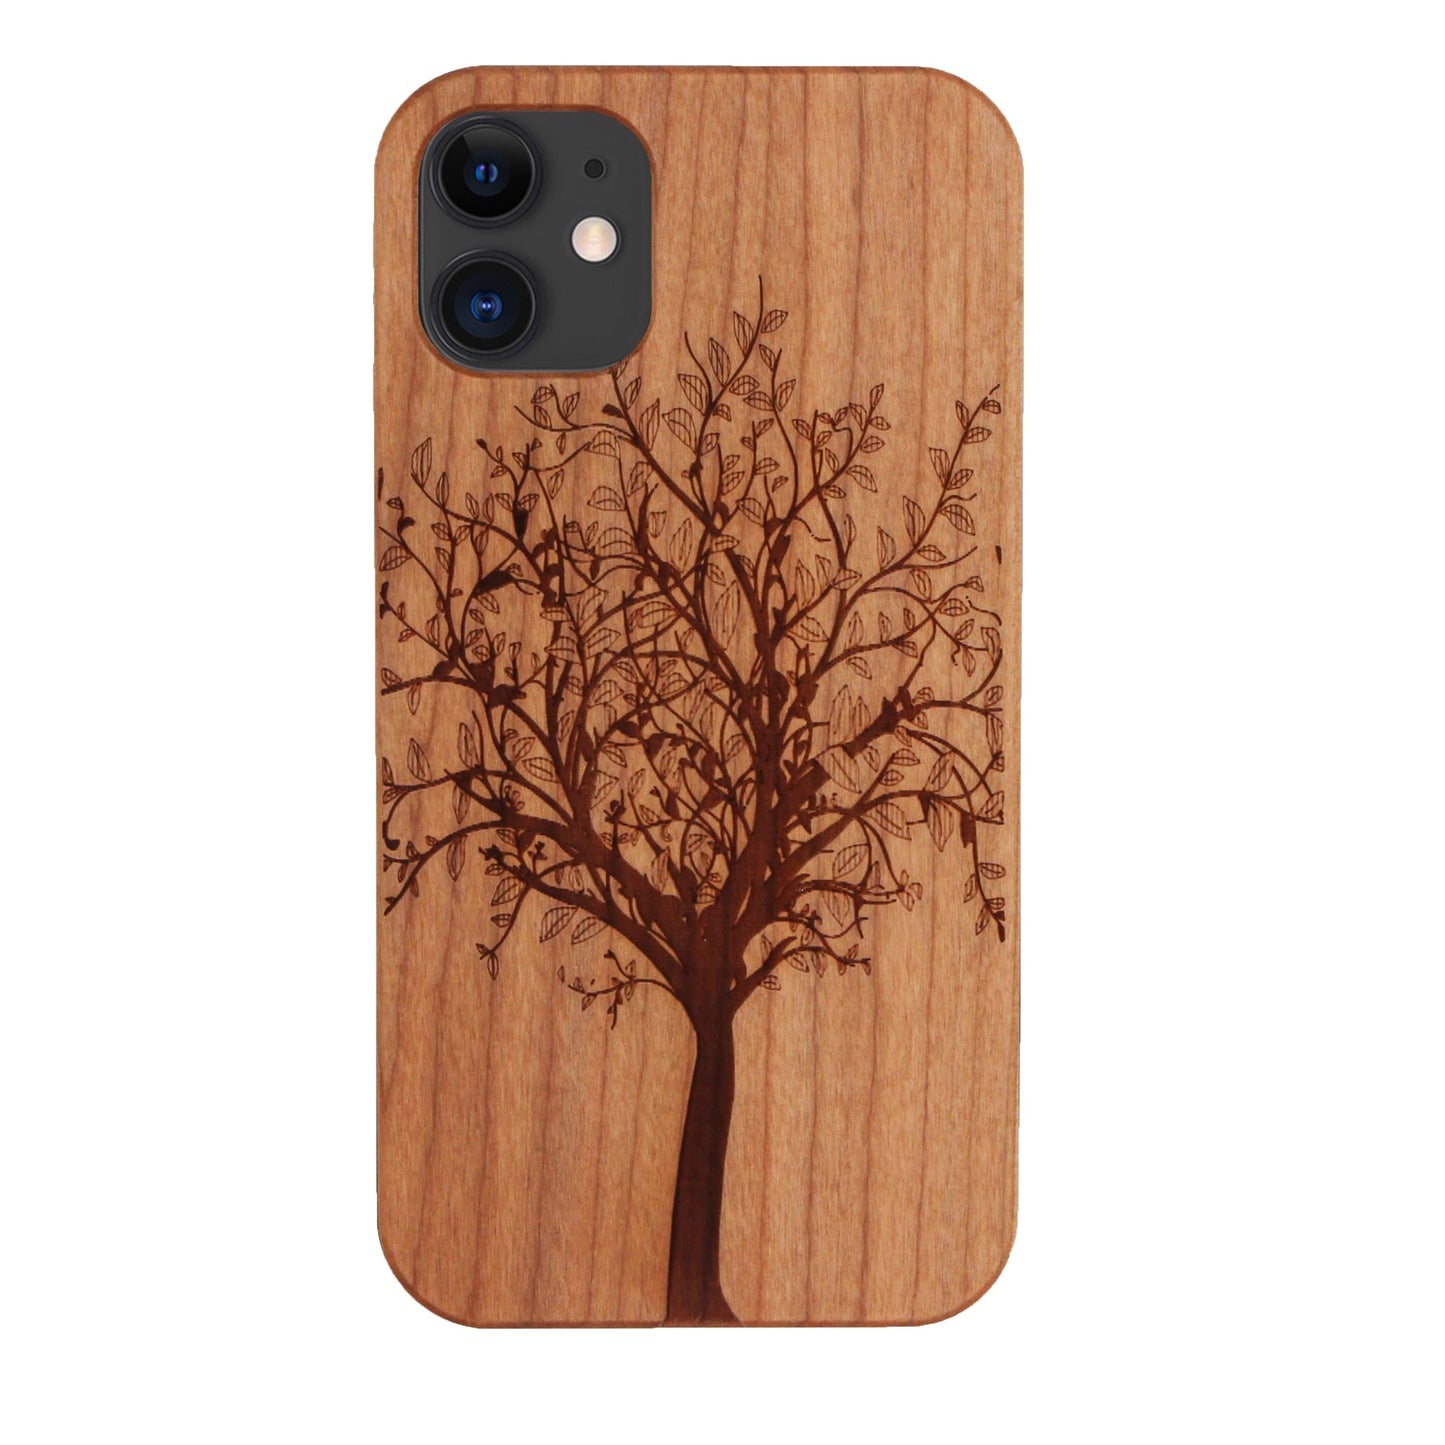 Tree of Life Eden case made of cherry wood for iPhone 11